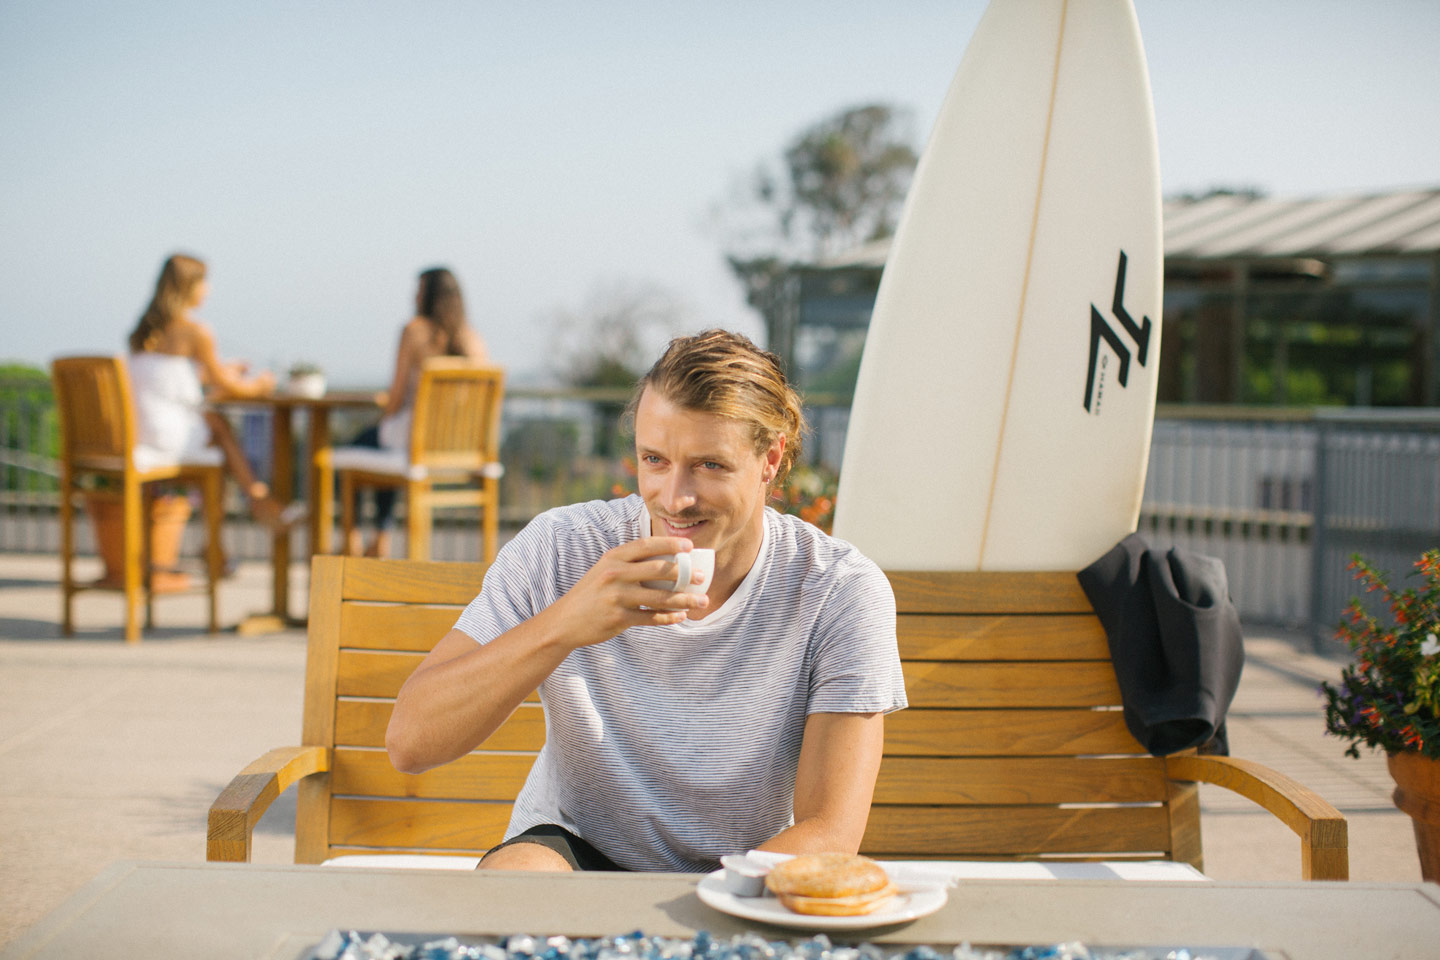 man sitting on bench in Del Mar Plaza, enjoying a drink and food. in the background is a blue sky, his surfboard, and some friends at another table